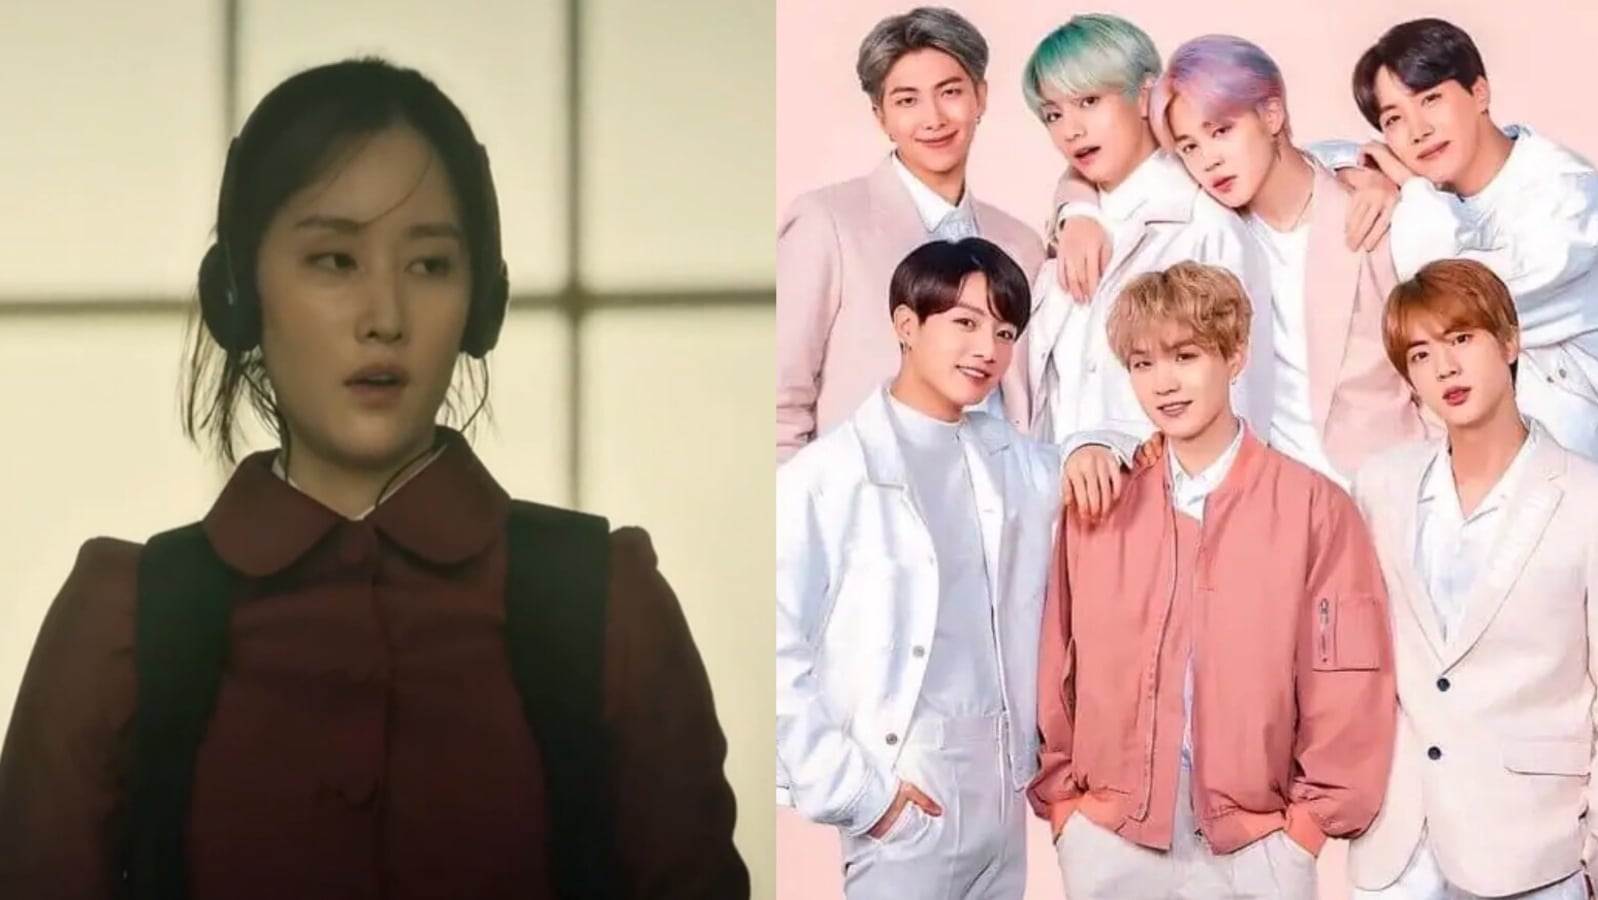 Money Heist: Korea’s Tokyo is an ARMY, grooves to BTS’ DNA in Episode 1, fans say ‘we are famous’